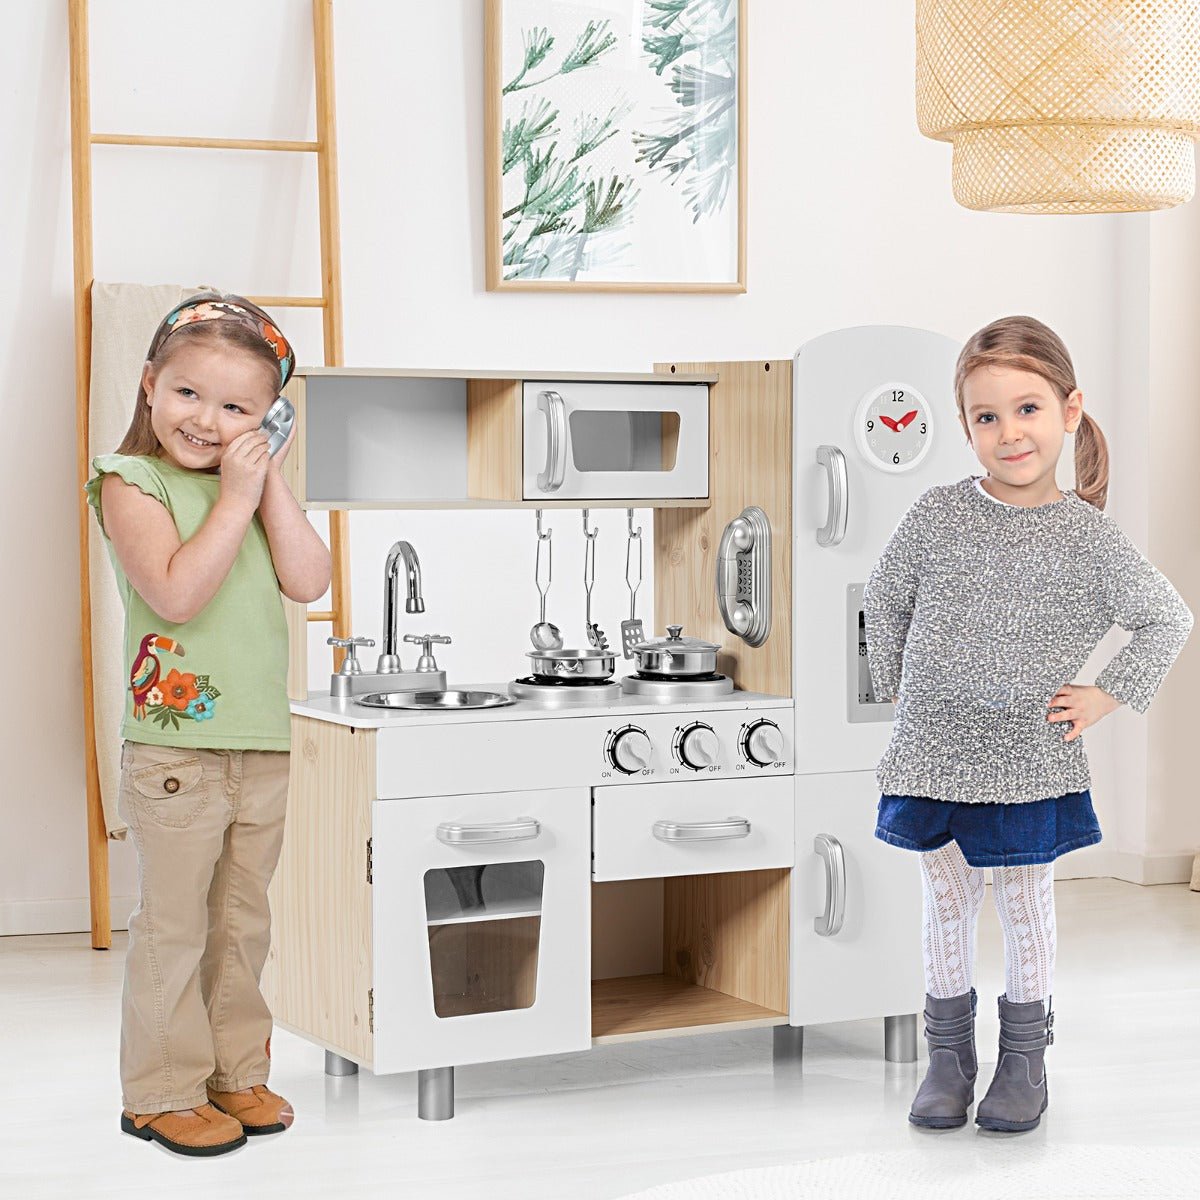 Explore and Create: Wooden Cooking Playset with Water Dispenser for Kids